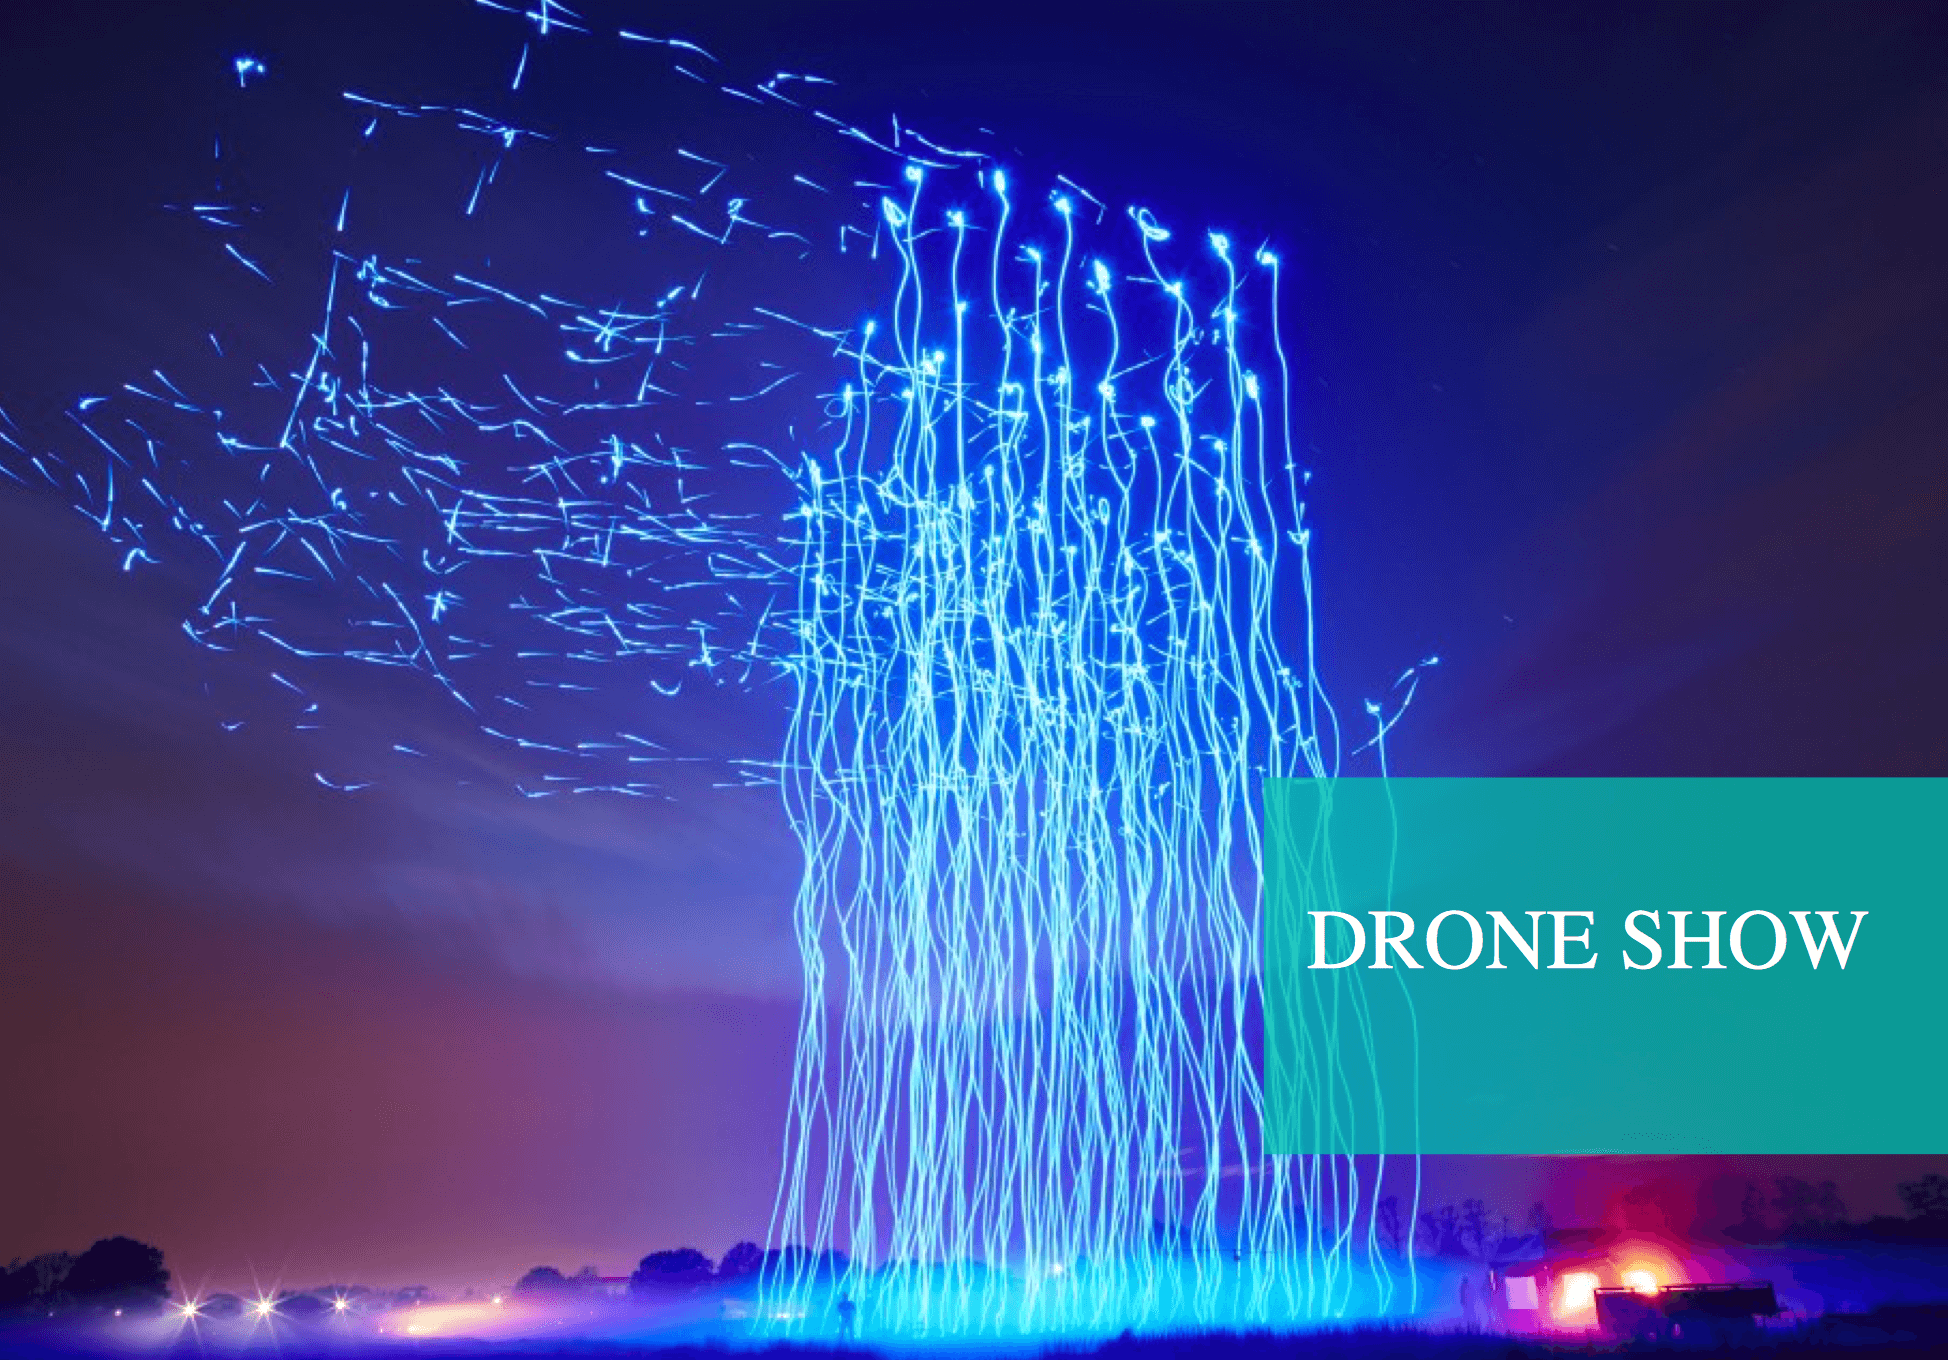 How Does a Drone Show Work?